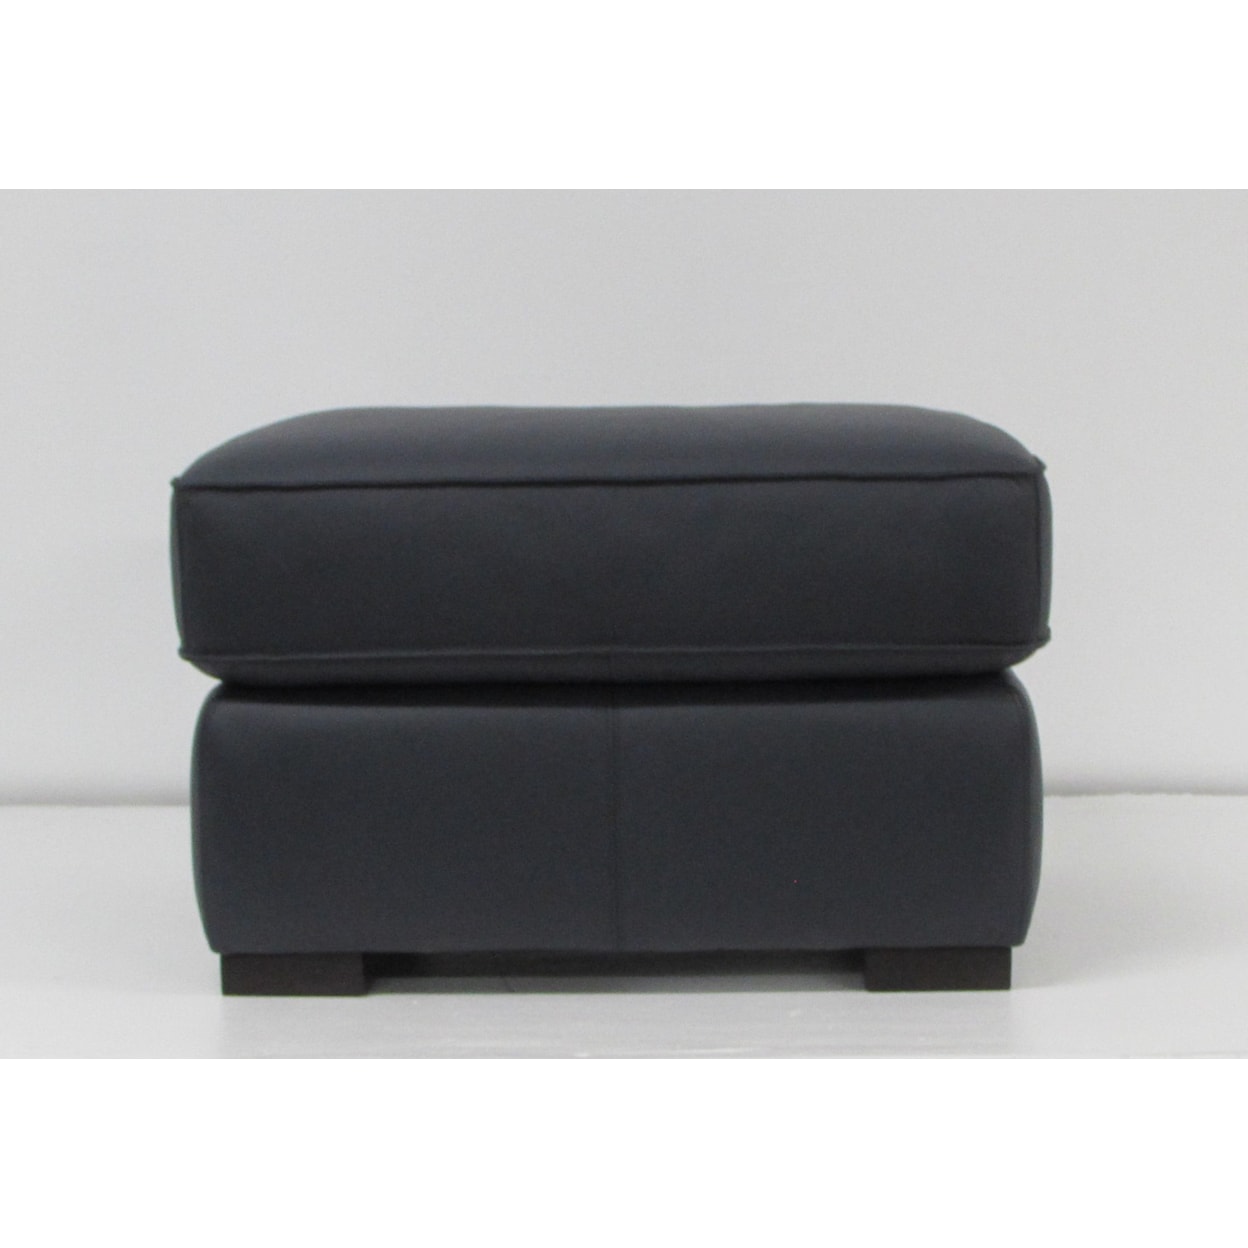 Natuzzi Editions C274 Leather Collection Navy Leather Ottoman